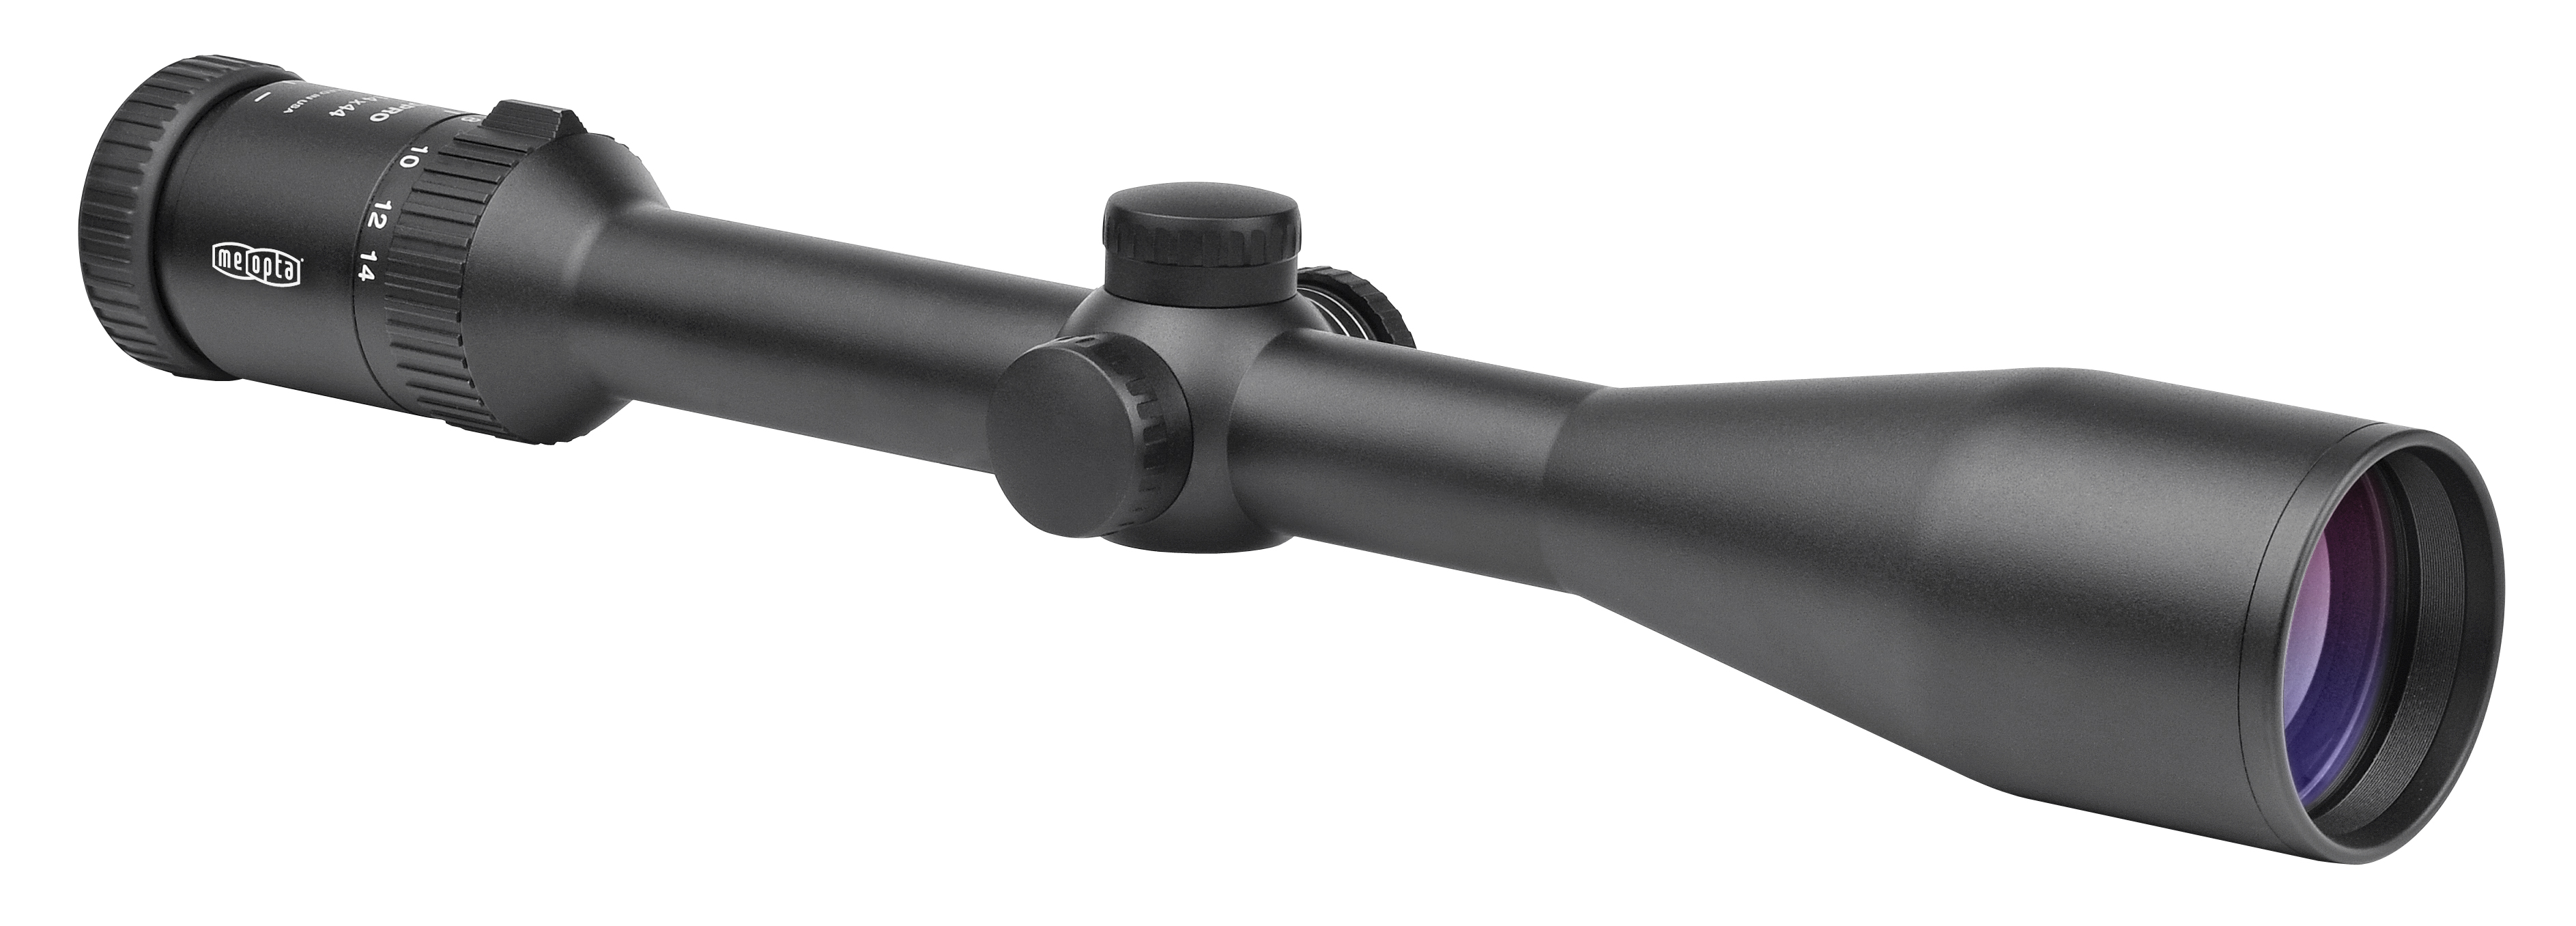 MEOPRO - 4.5-14x44 with BDC Reticle - MEO598830